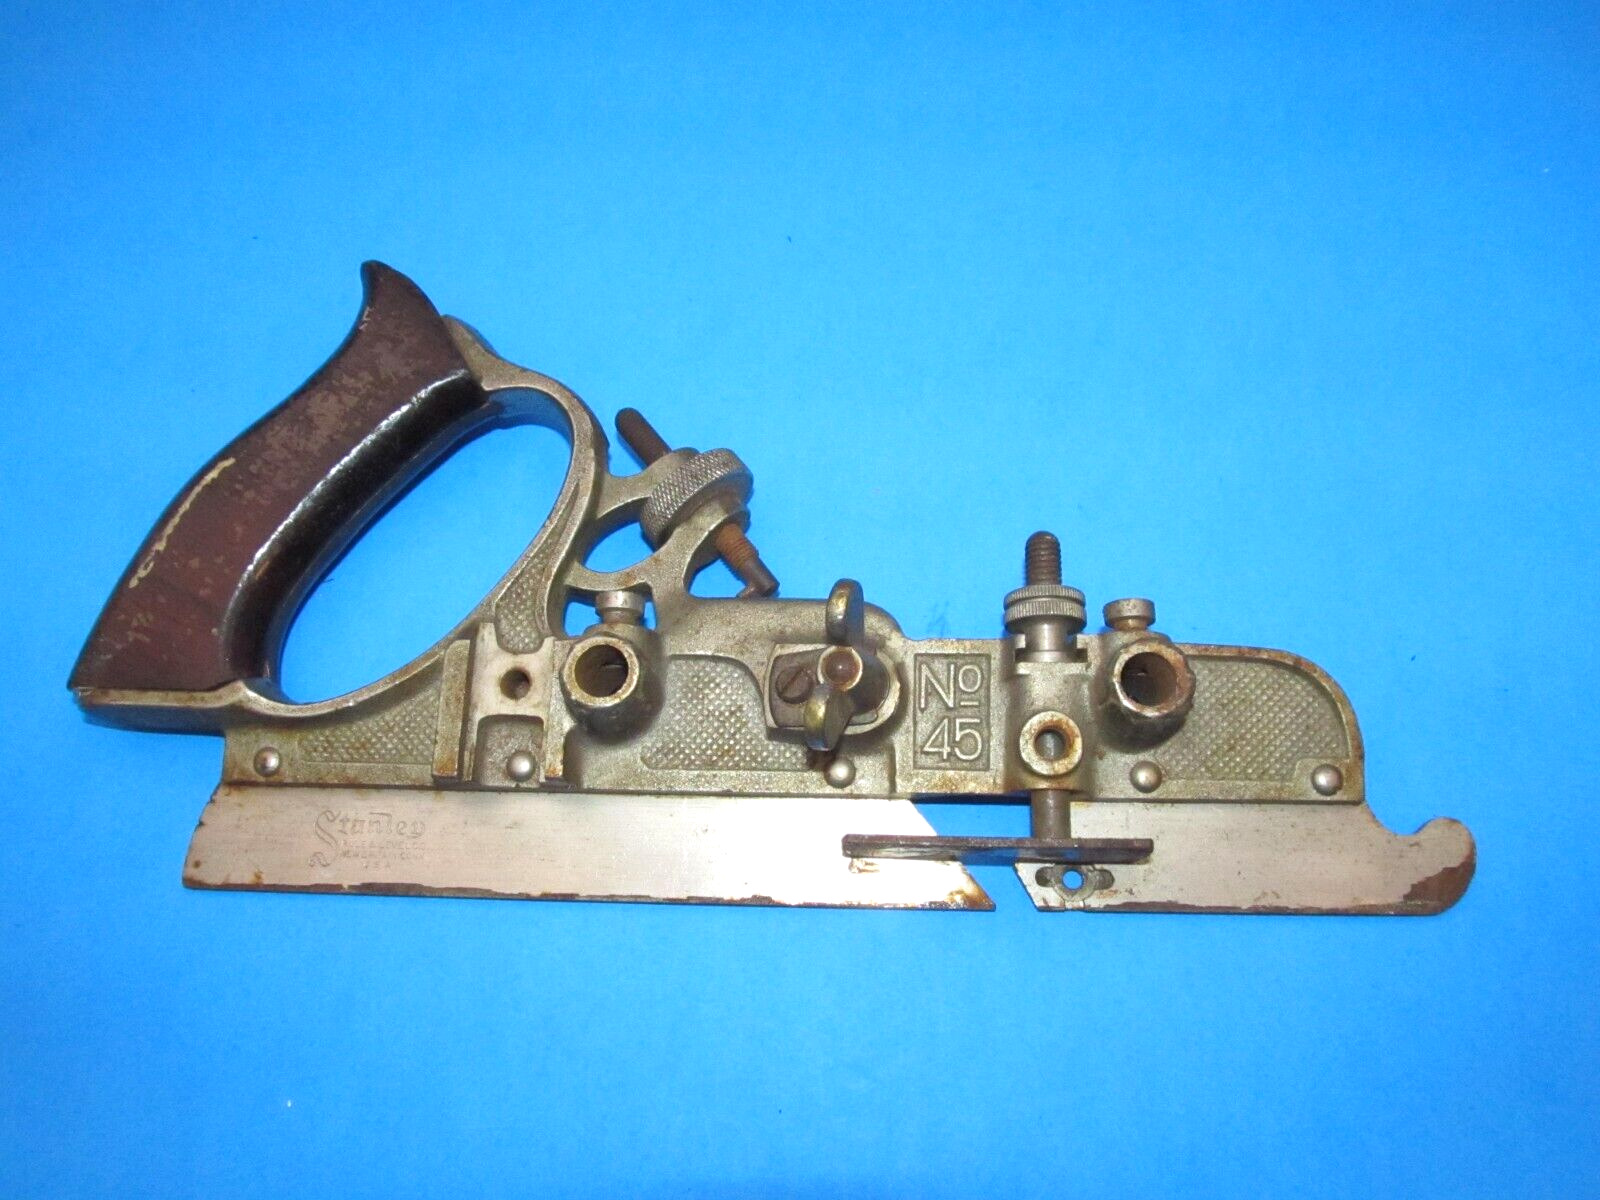 parts - main frame or body w/ depth stop & screws for Stanley No 45 wood plane